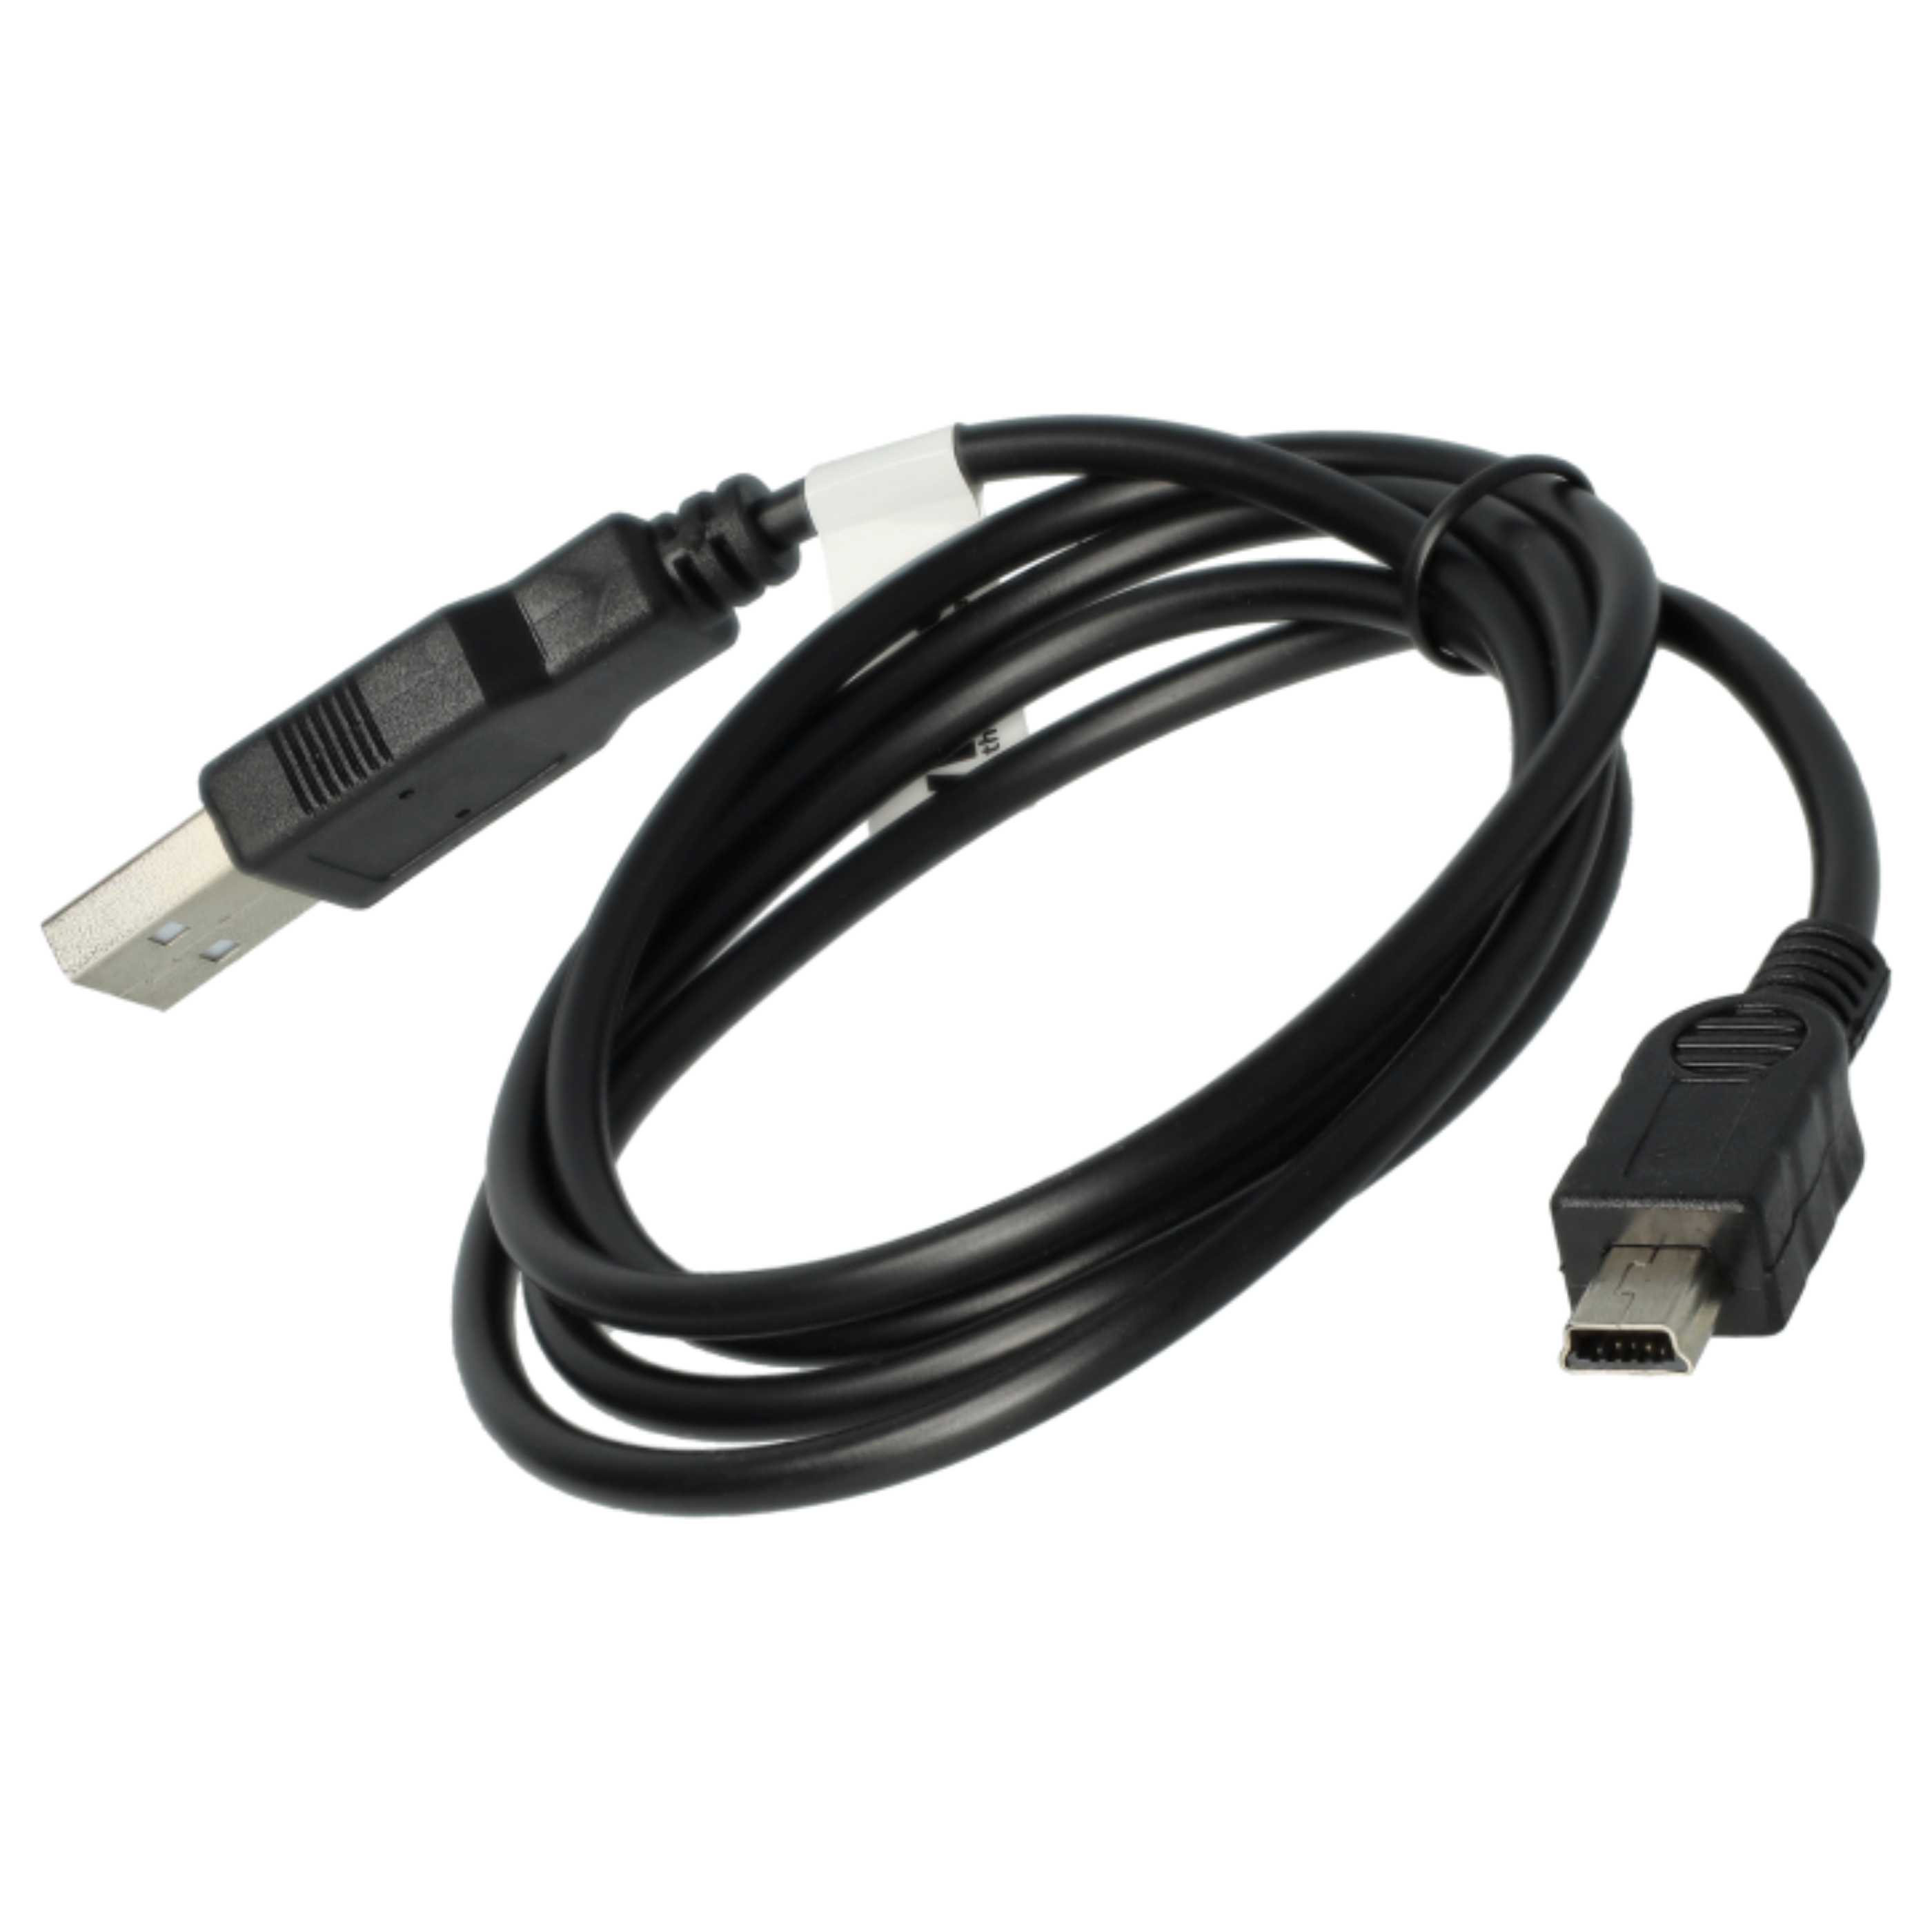 vhbw USB Cable Games Console - 2in1 Data Cable / Charger 1m Long100cm Long